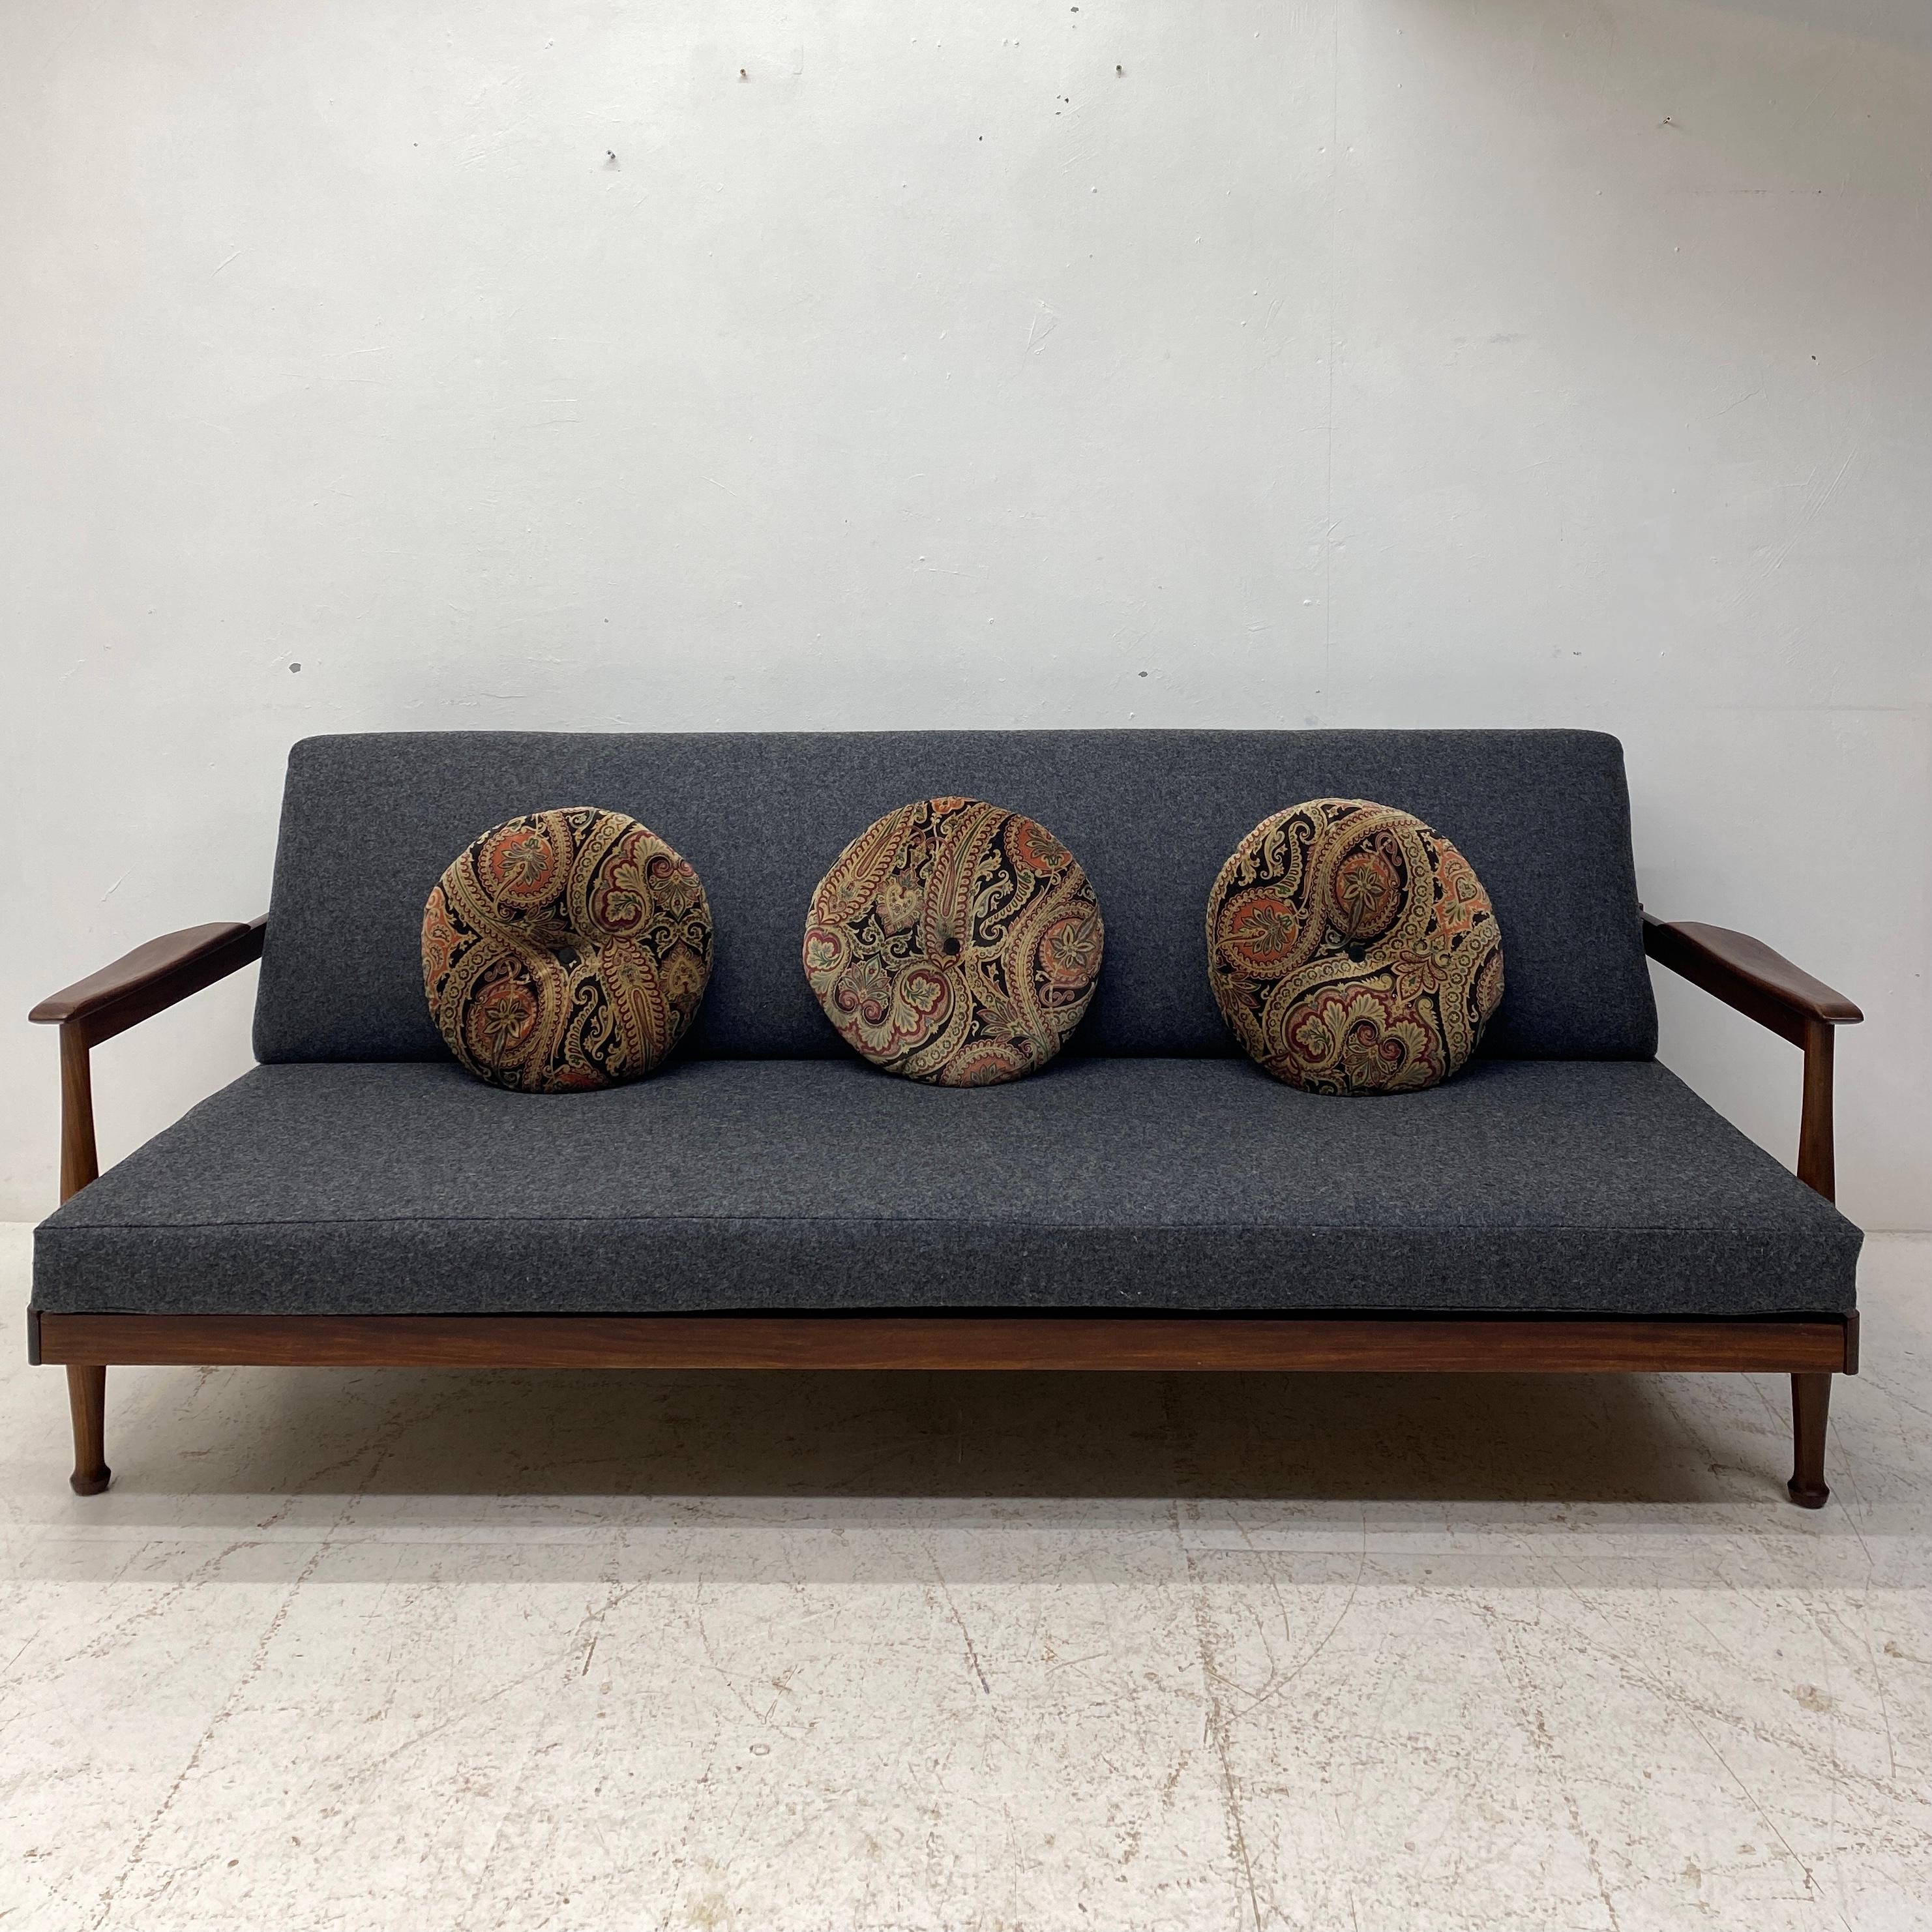 A beautifully restored midcentury sofa bed from Guy Rogers Manhattan range. The studio couch was designed in 1962 by George Fejer and Eric Phamphilan & made in Britain. This studio couch has been totally restored and reupholstered. The afromosia